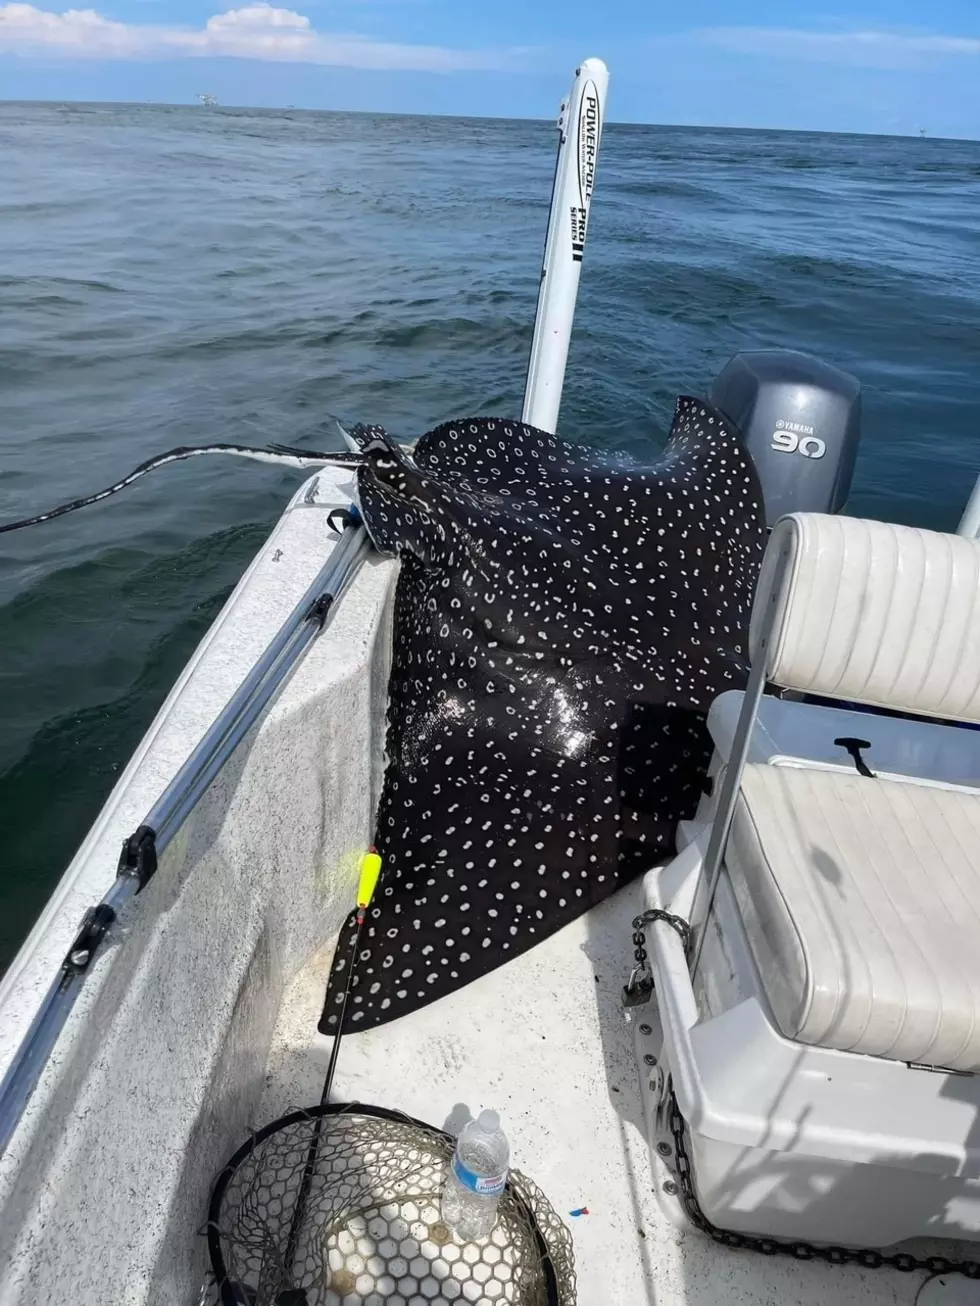 400 Pound Sting Ray Jumps in Alabama Woman's Boat 